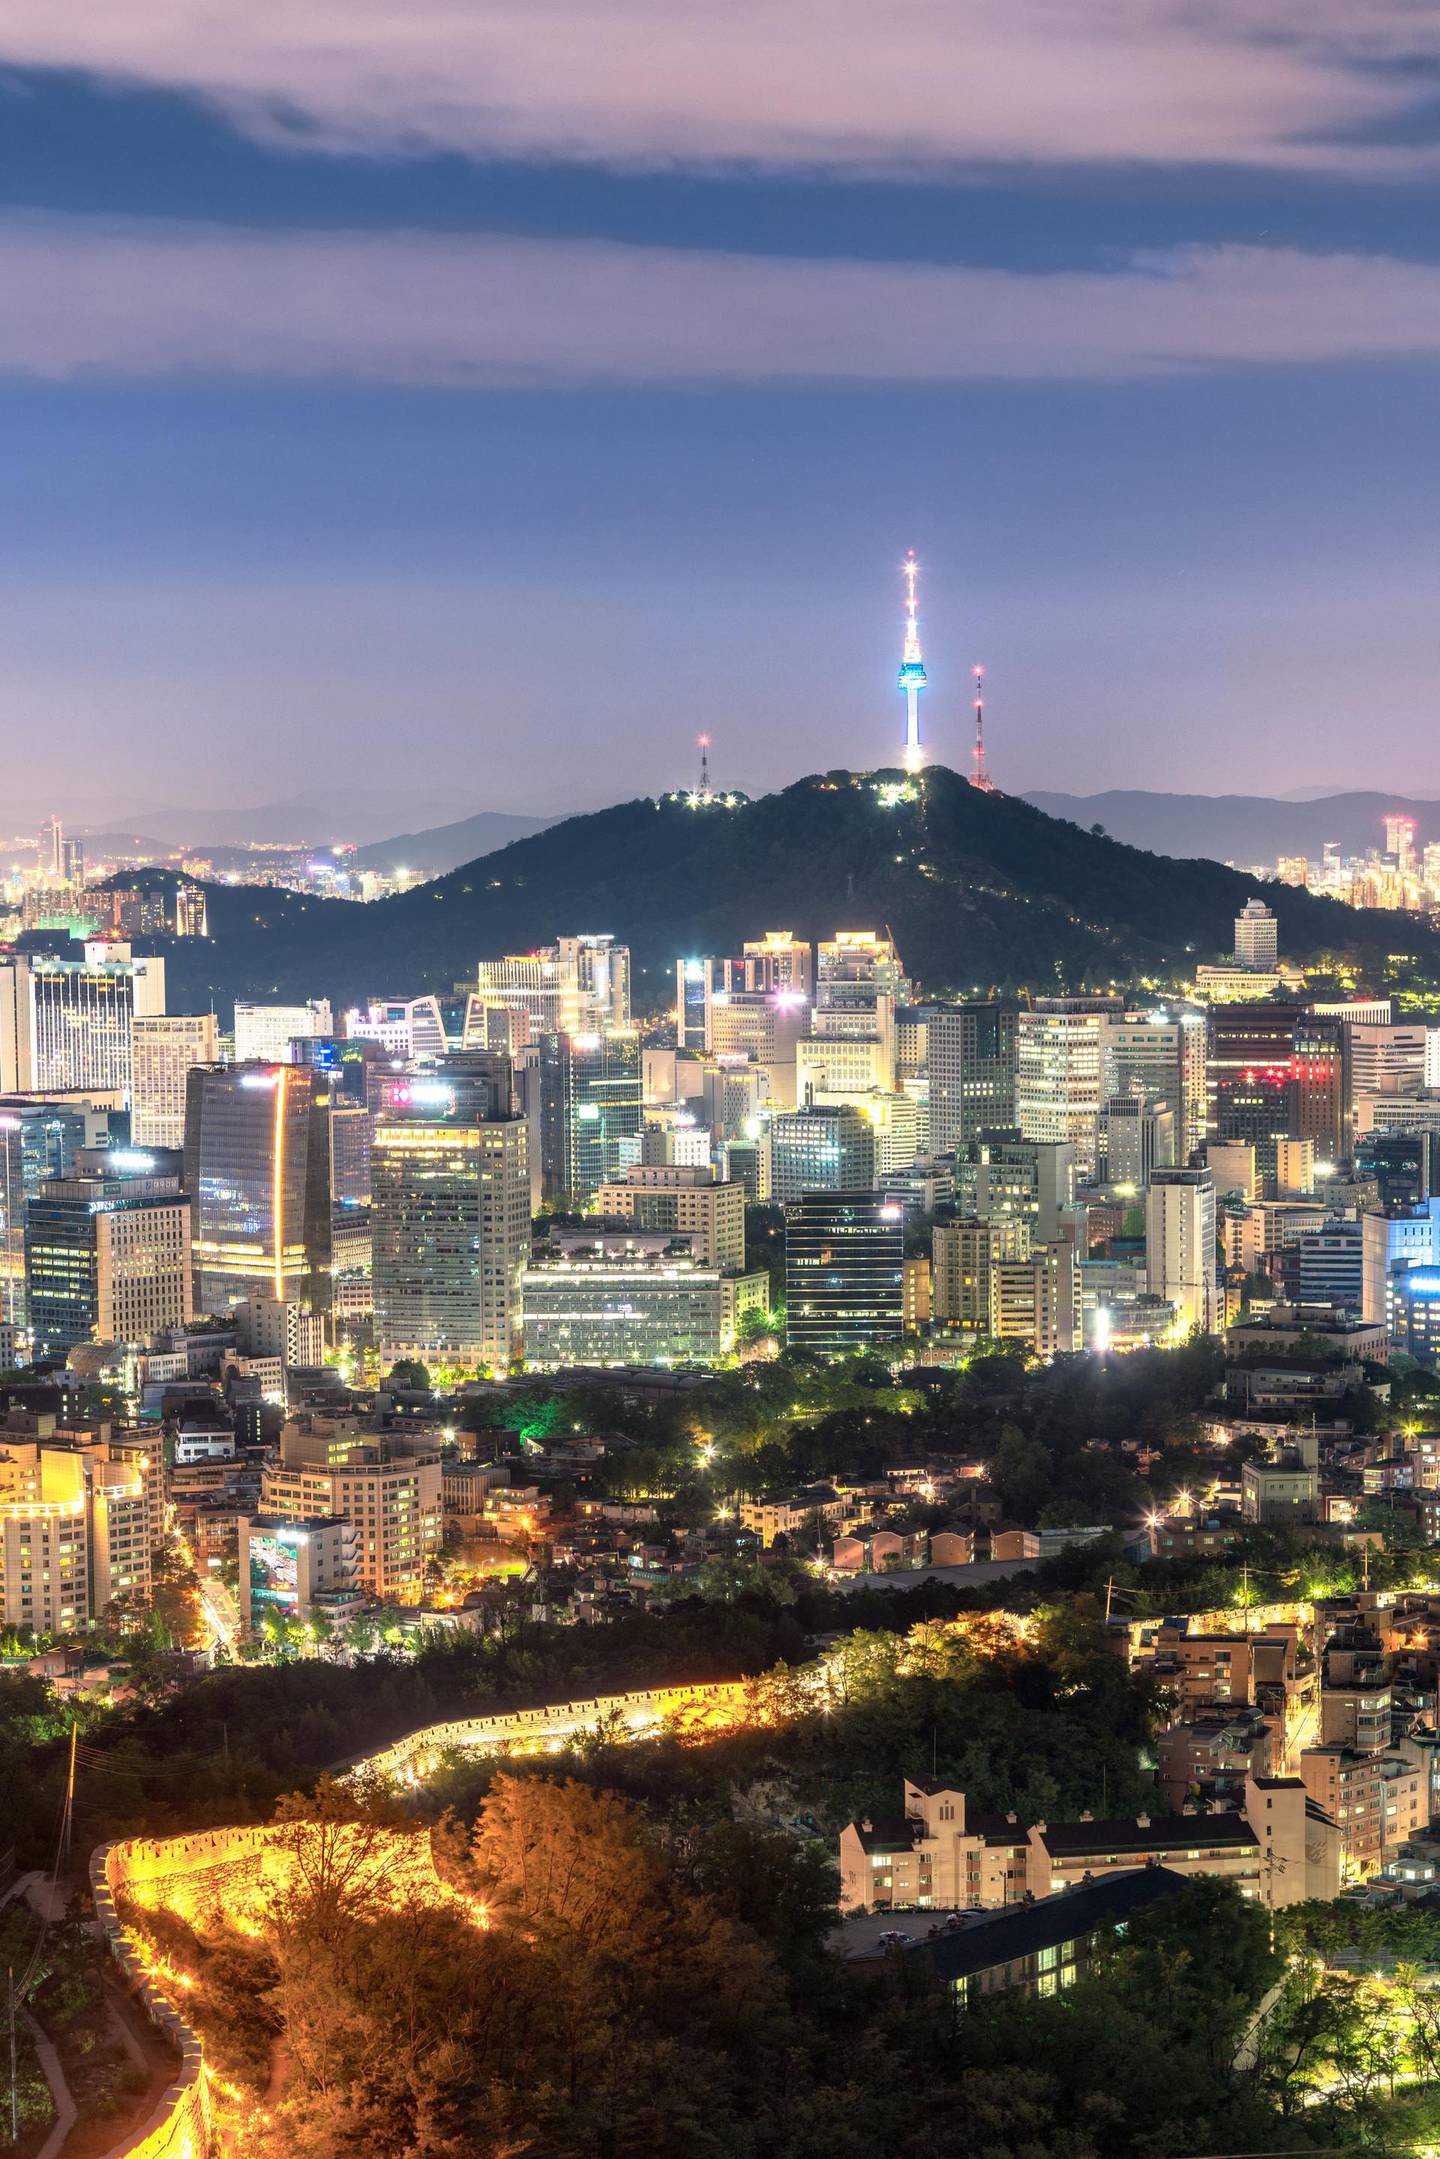 Aerial view of Seoul downtown cityscape and Namsan Seoul Tower at night, Seoul, South Korea.Getty Images